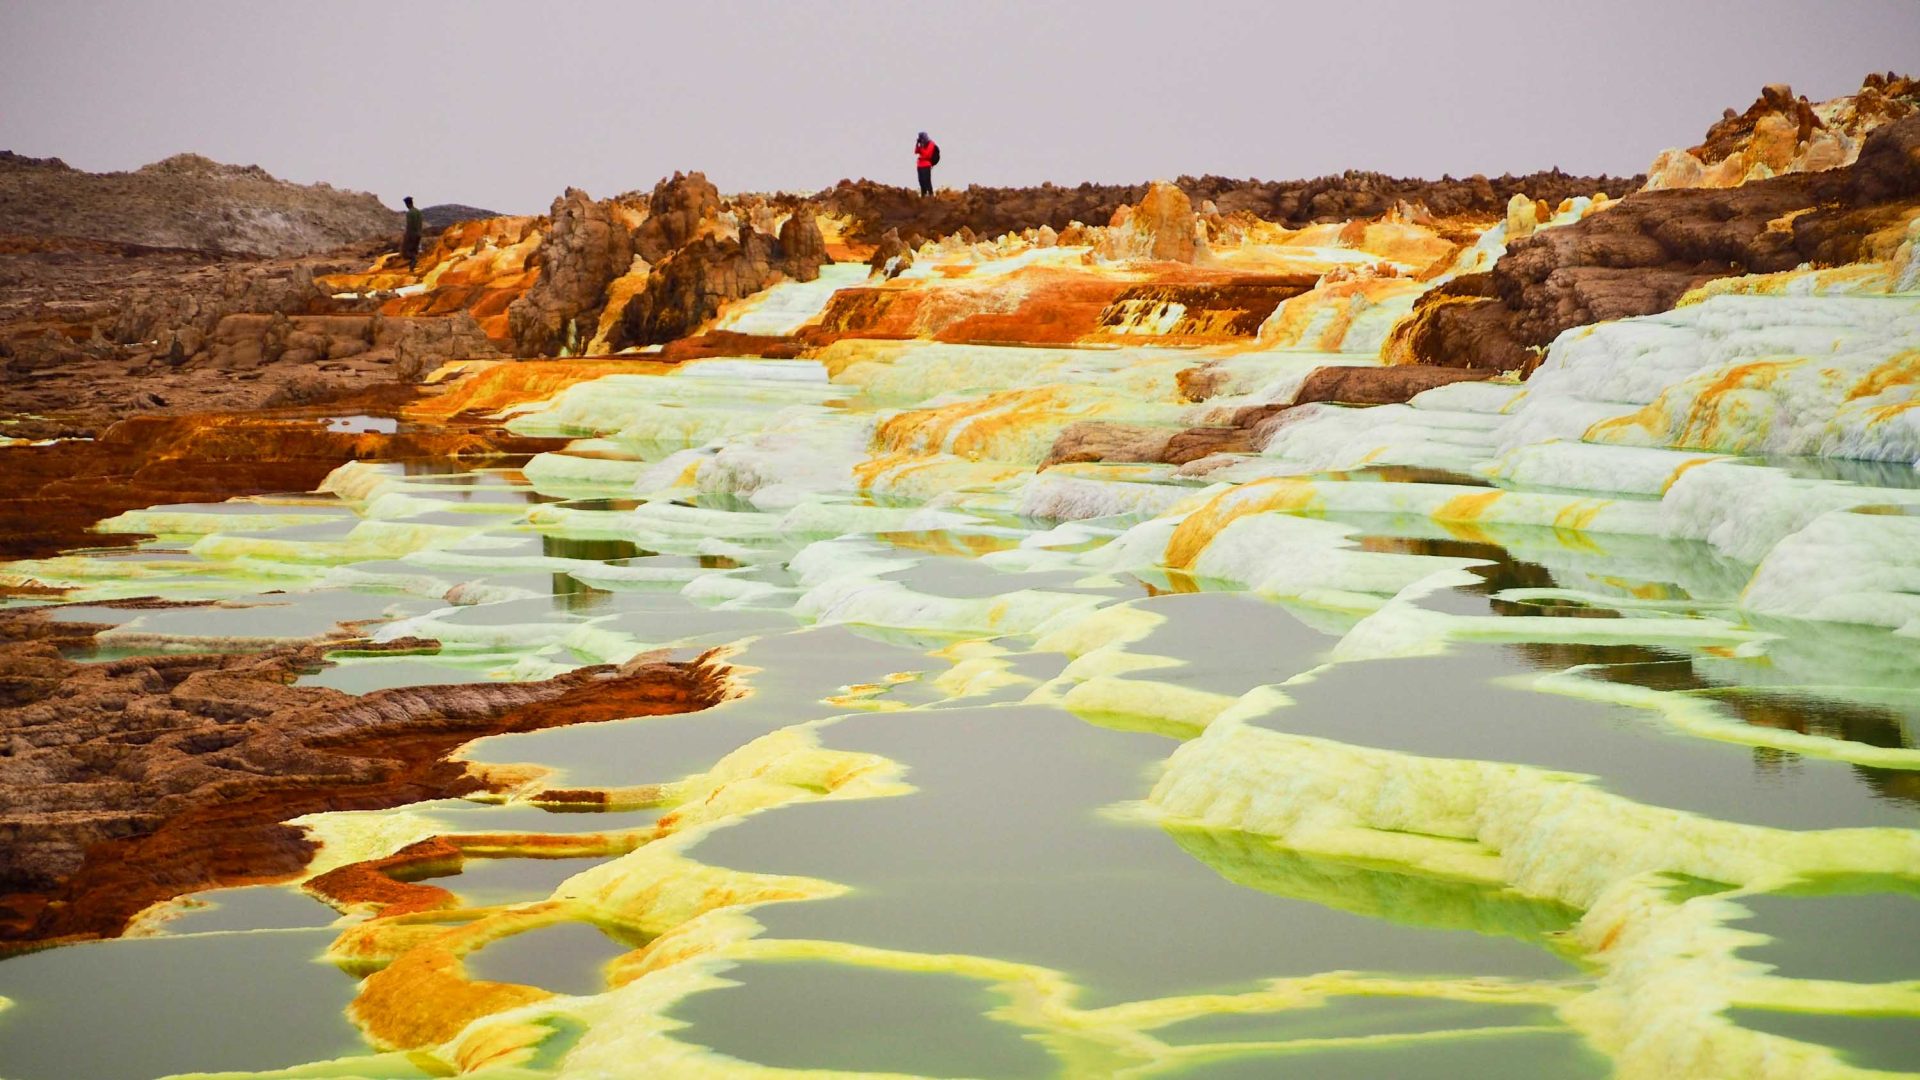 Surreal sulphur pools in shades of rusty brown and yellow.